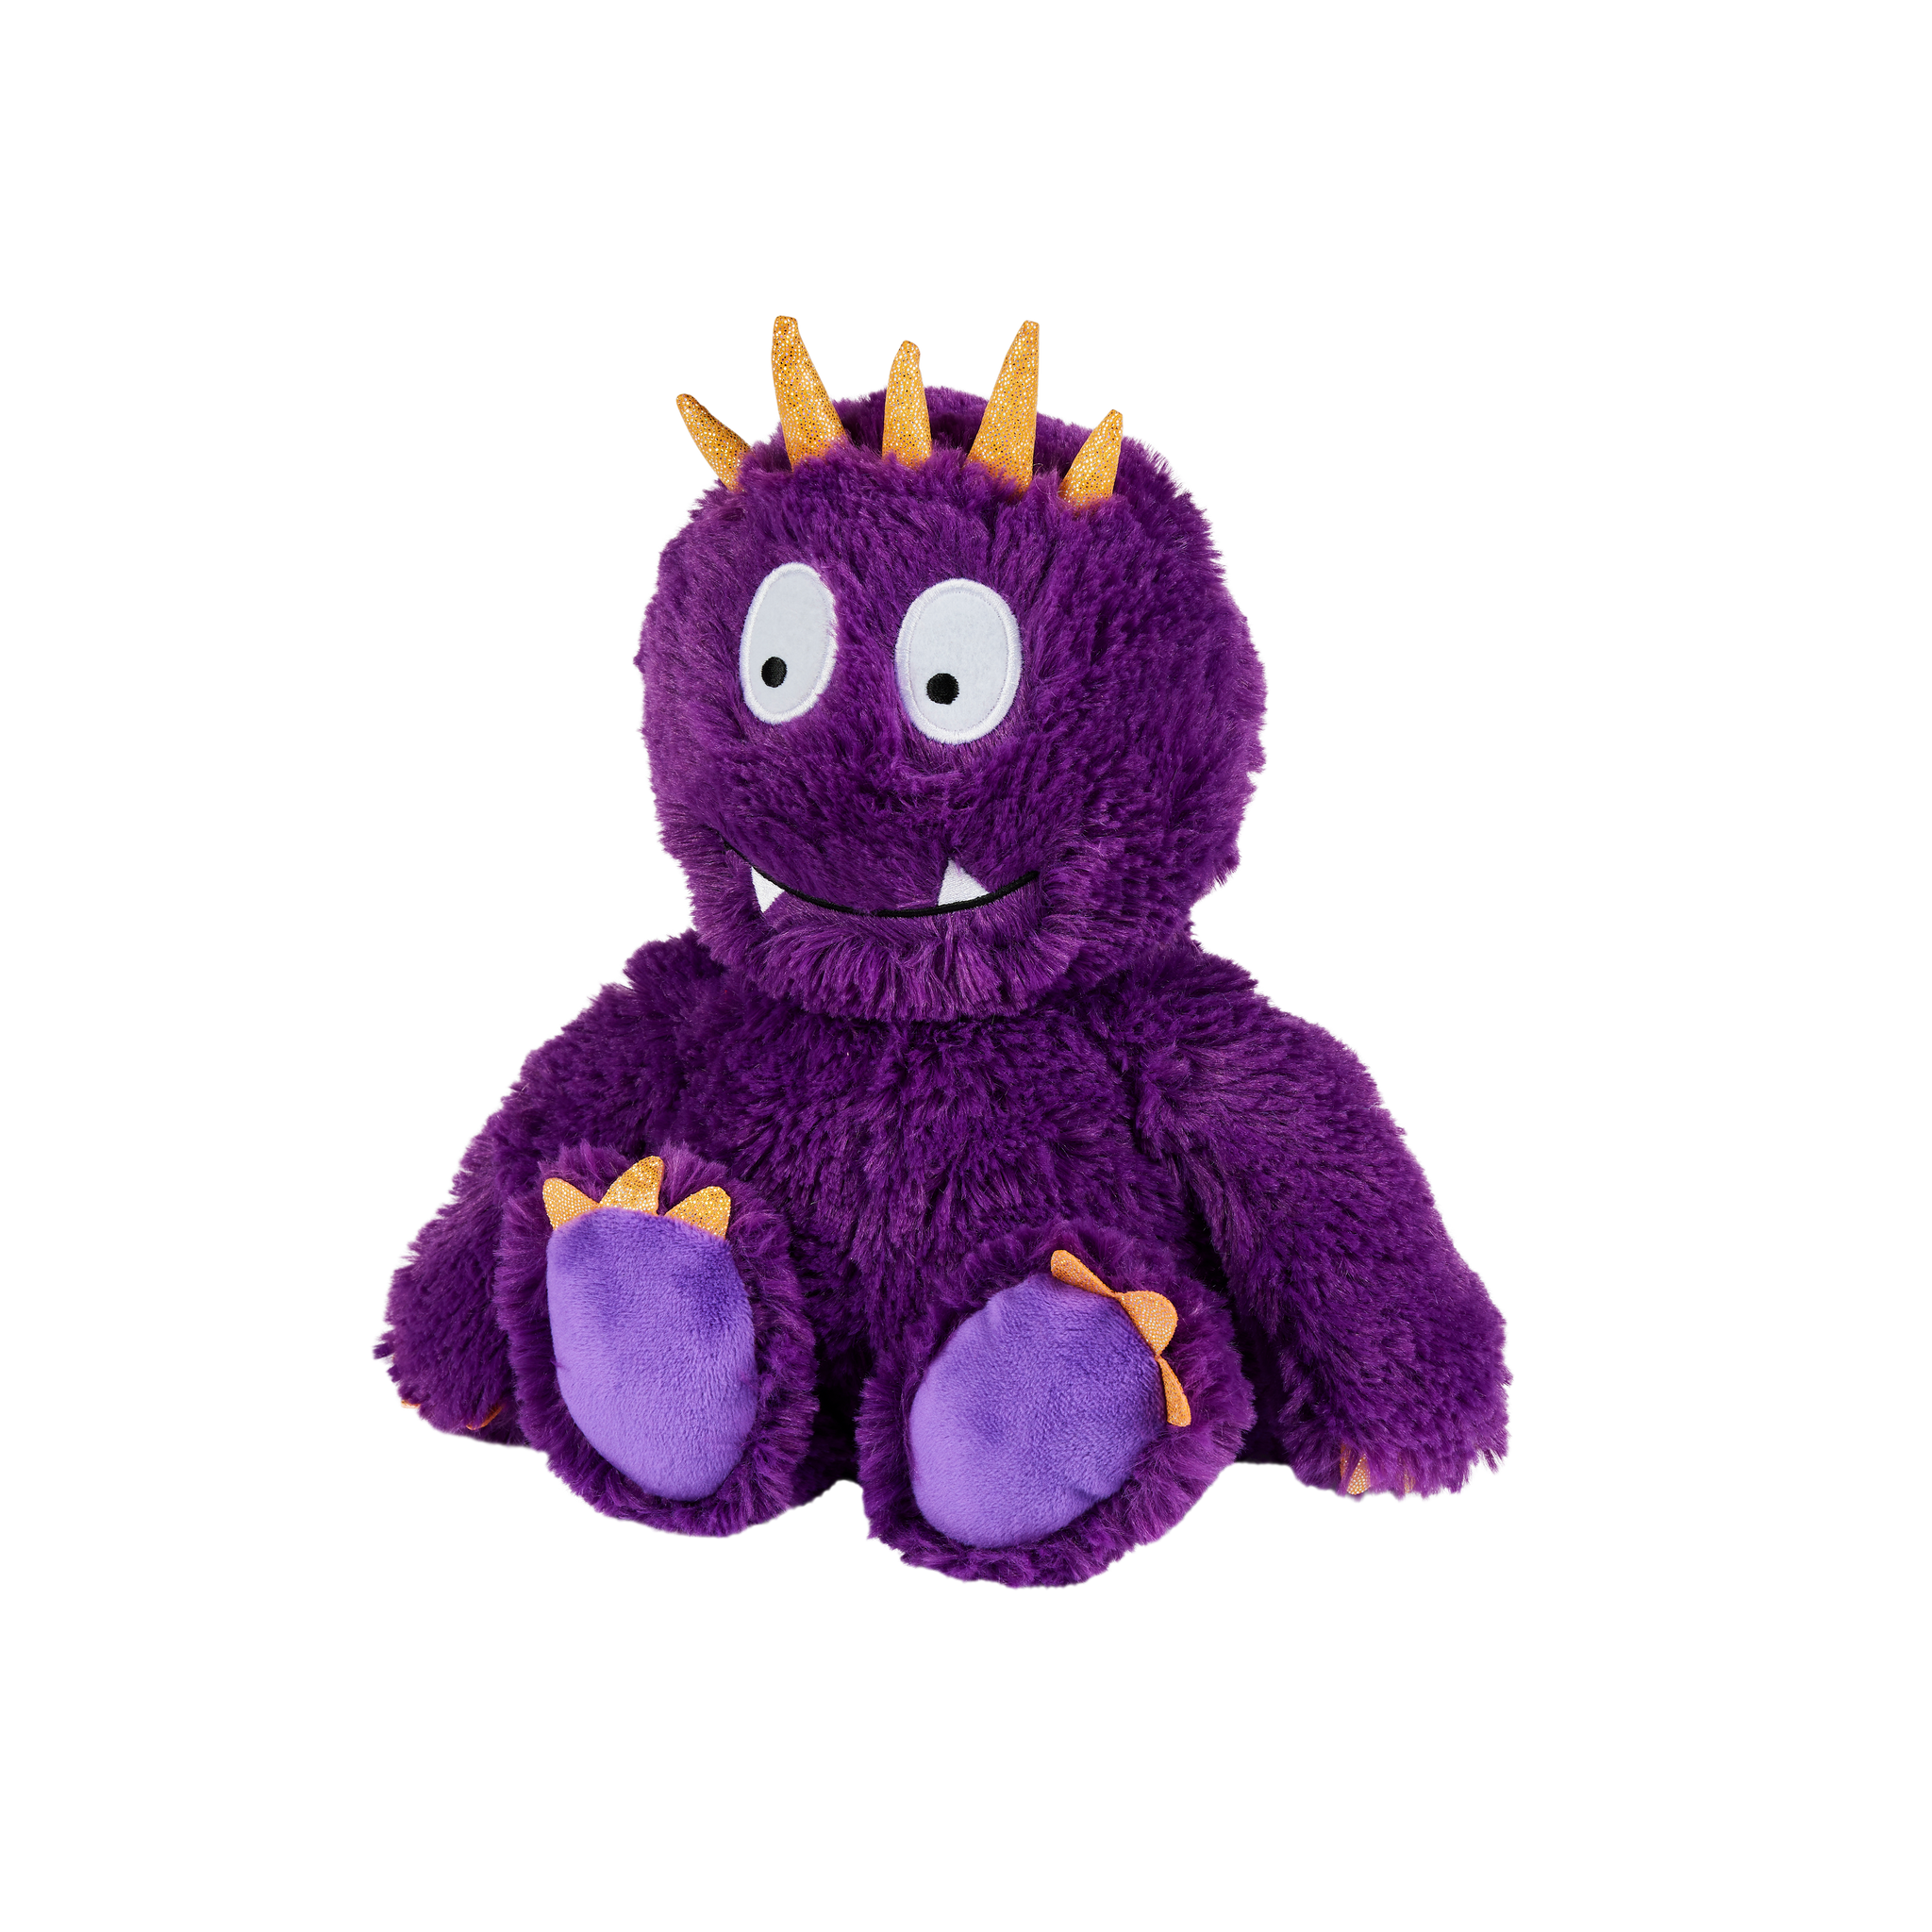 Bright Purple Monster from Pixi Daisy